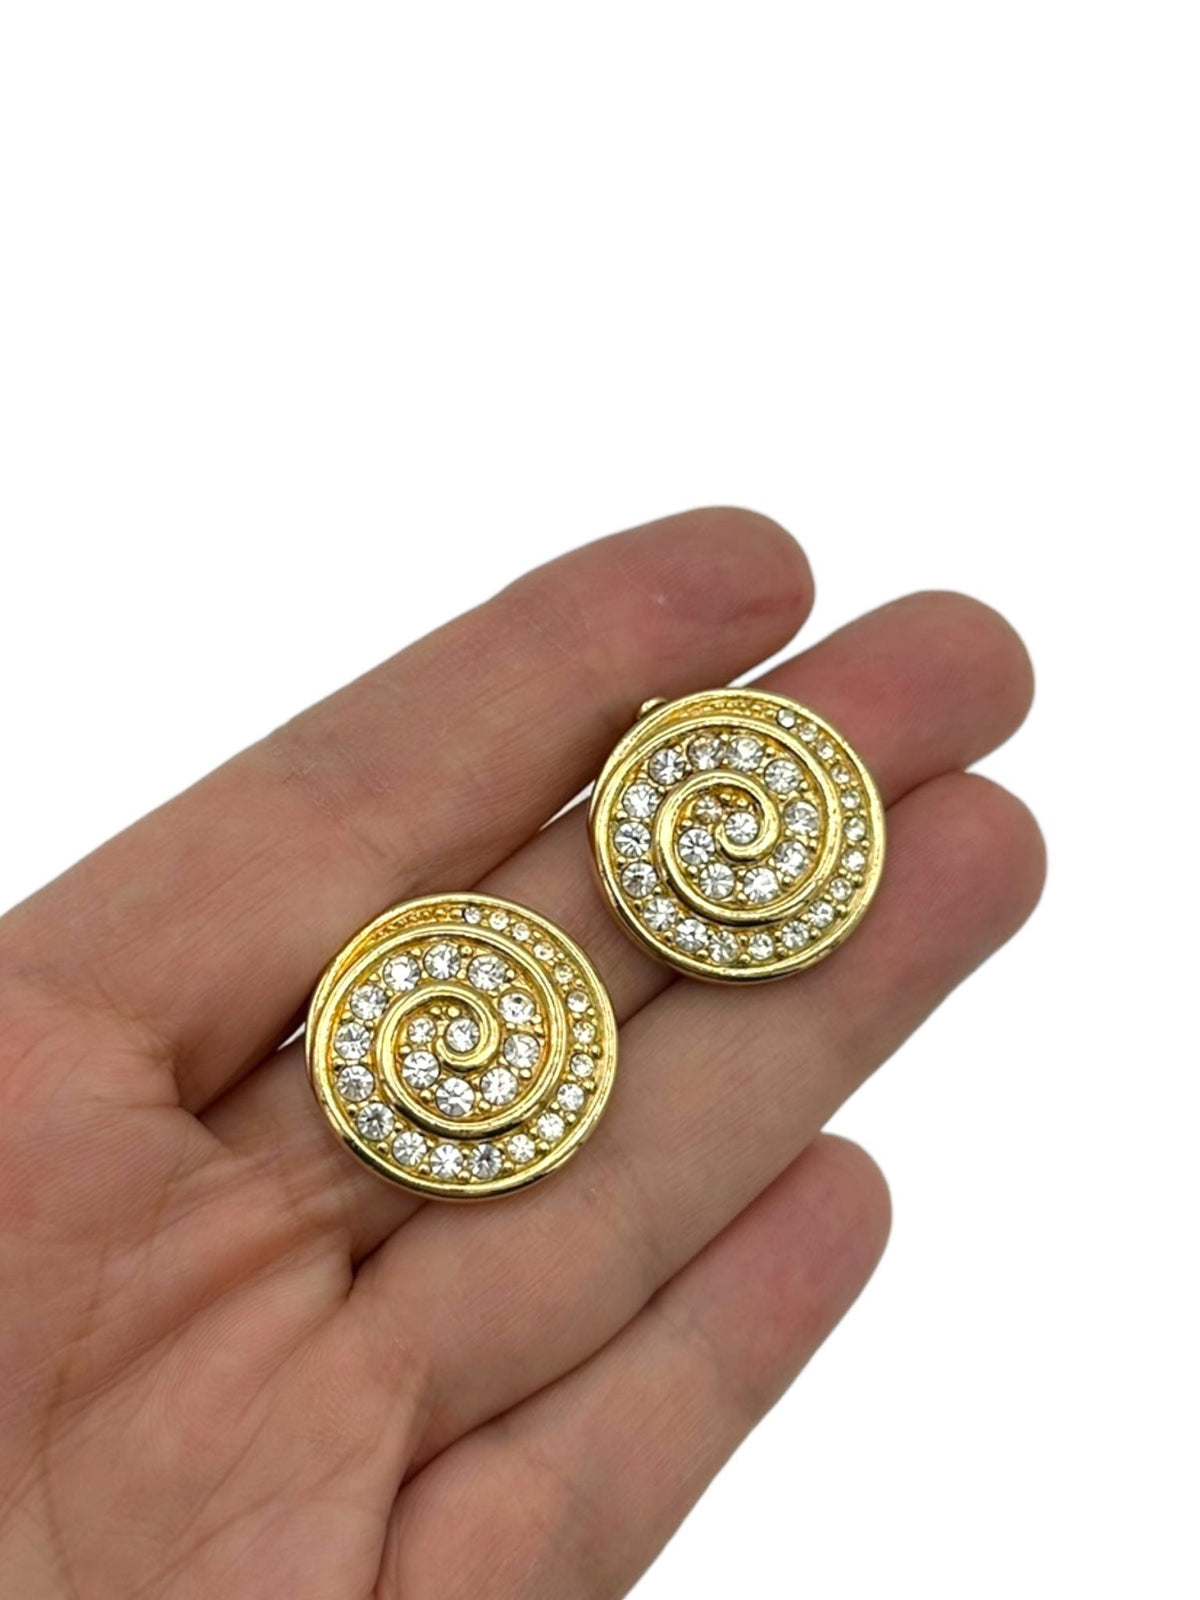 Gold Round Swarovski Clear Crystal Pave Rhinestone Clip-on Earrings - 24 Wishes Vintage Jewelry